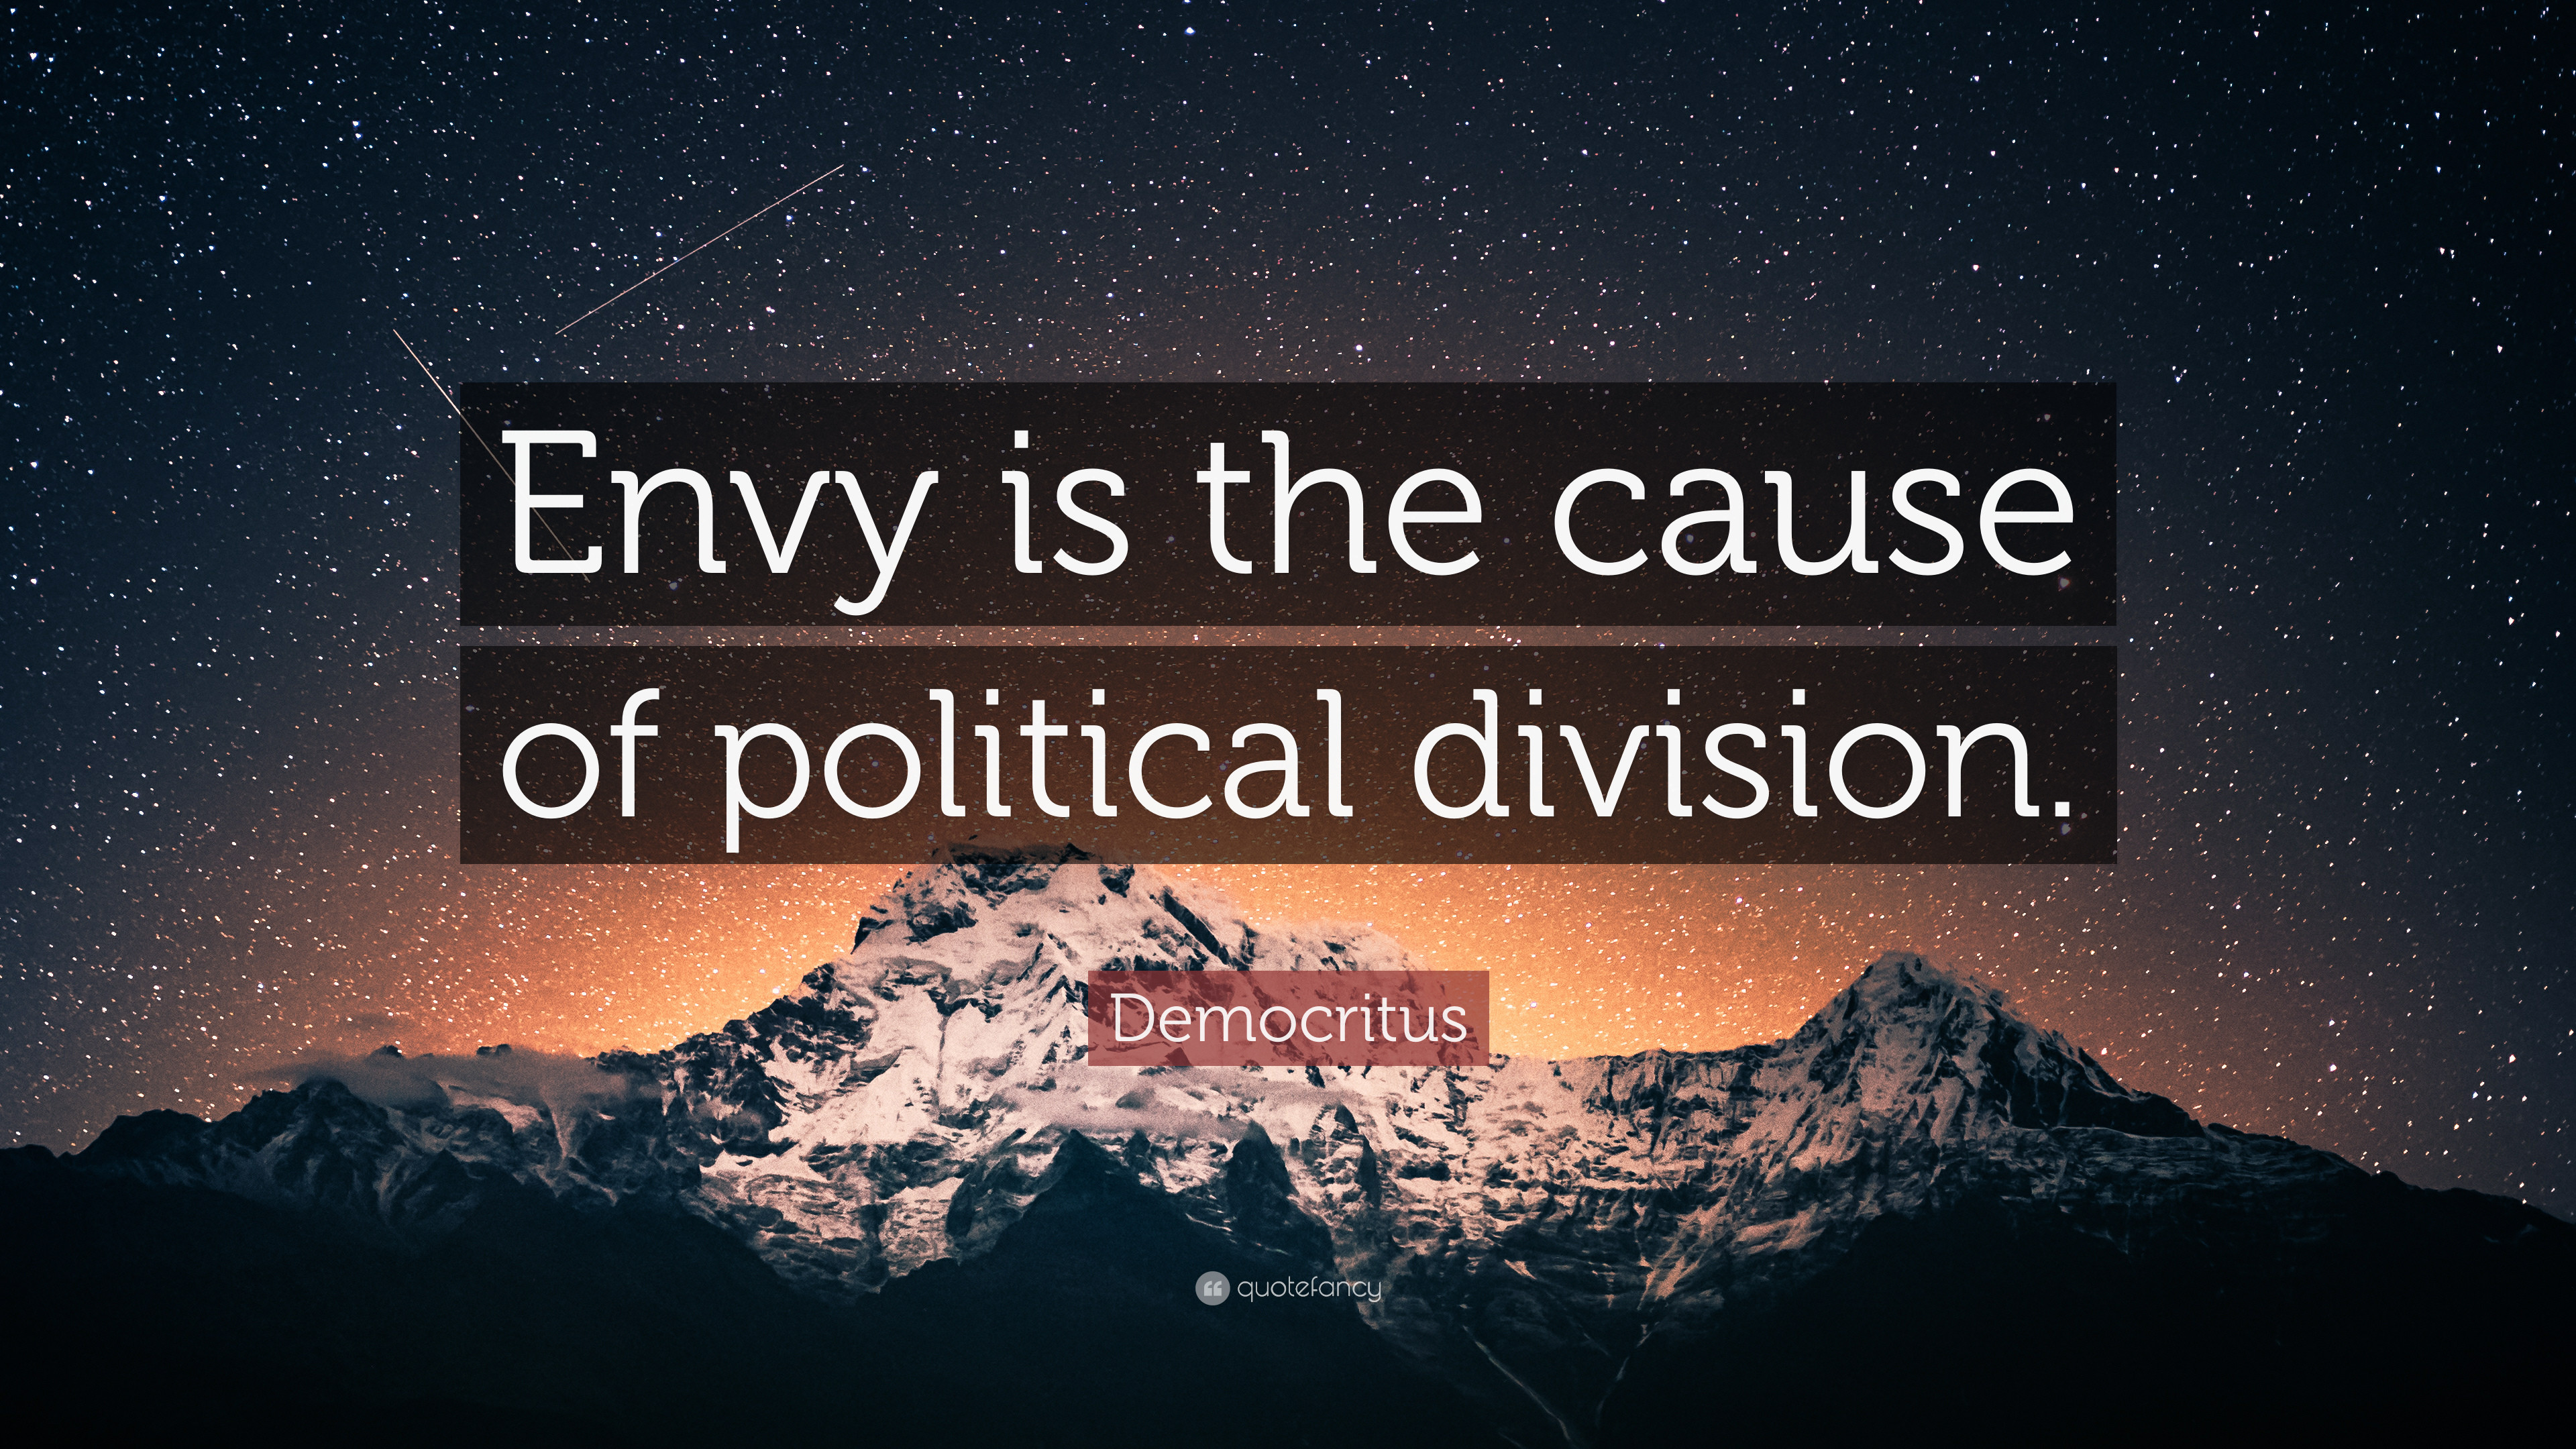 3840x2160 Democritus Quote: “Envy is the cause of political division.”